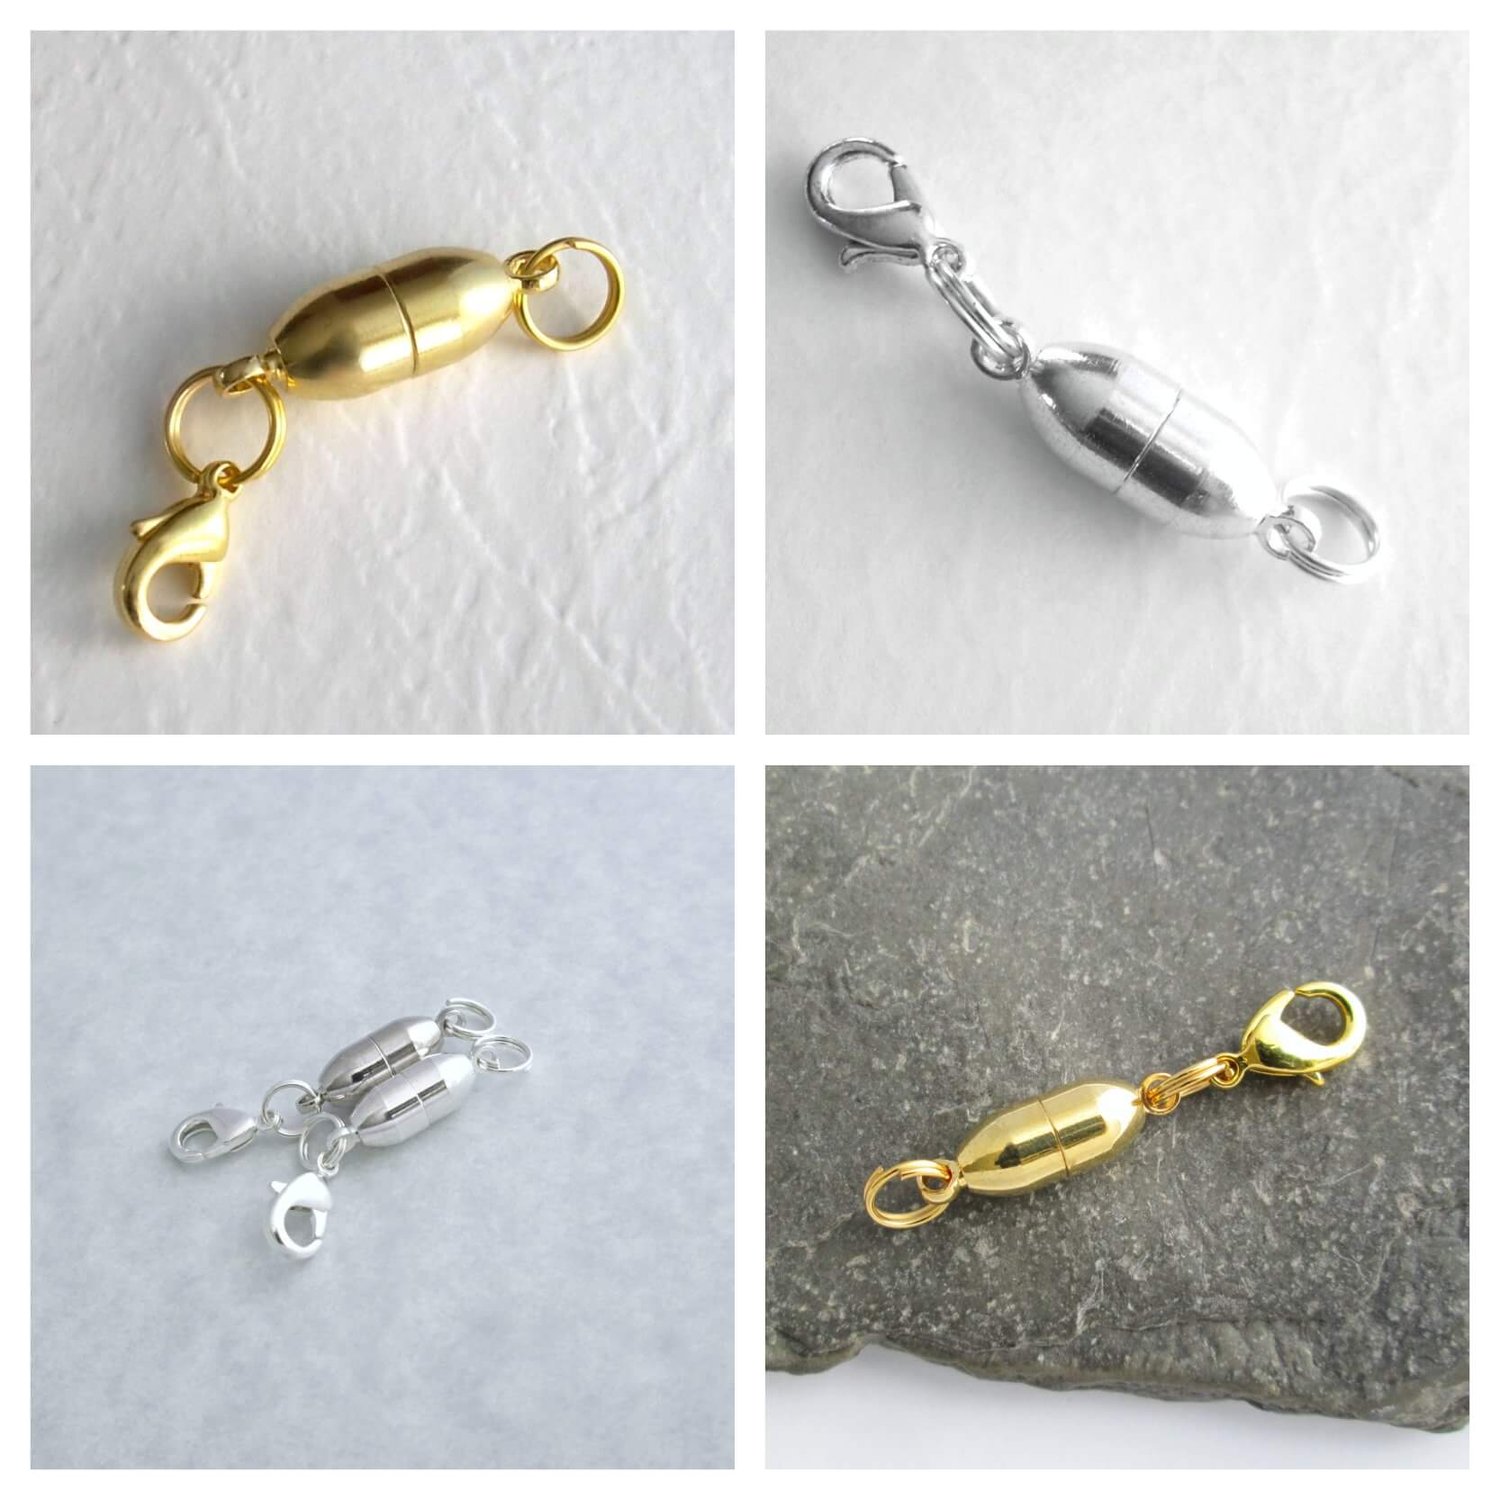 Wholesale Magnetic Clasps - (Strong and Secure jewelry closures)